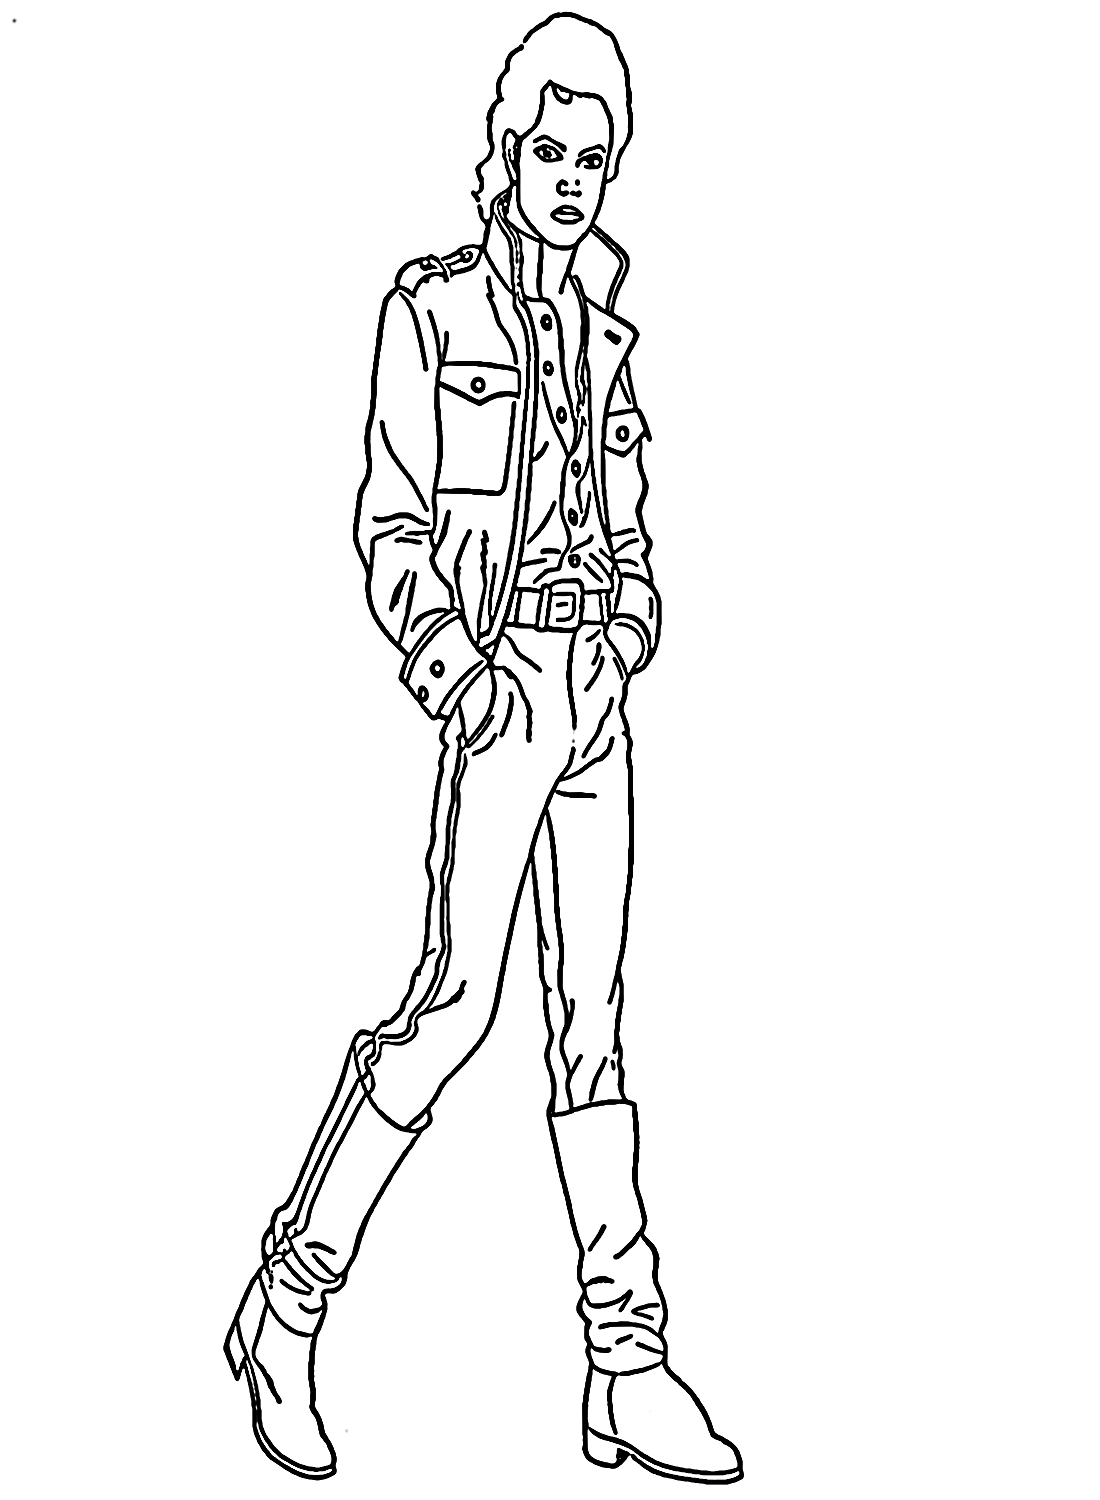 Michael Jackson with Signature Outfits Coloring Page